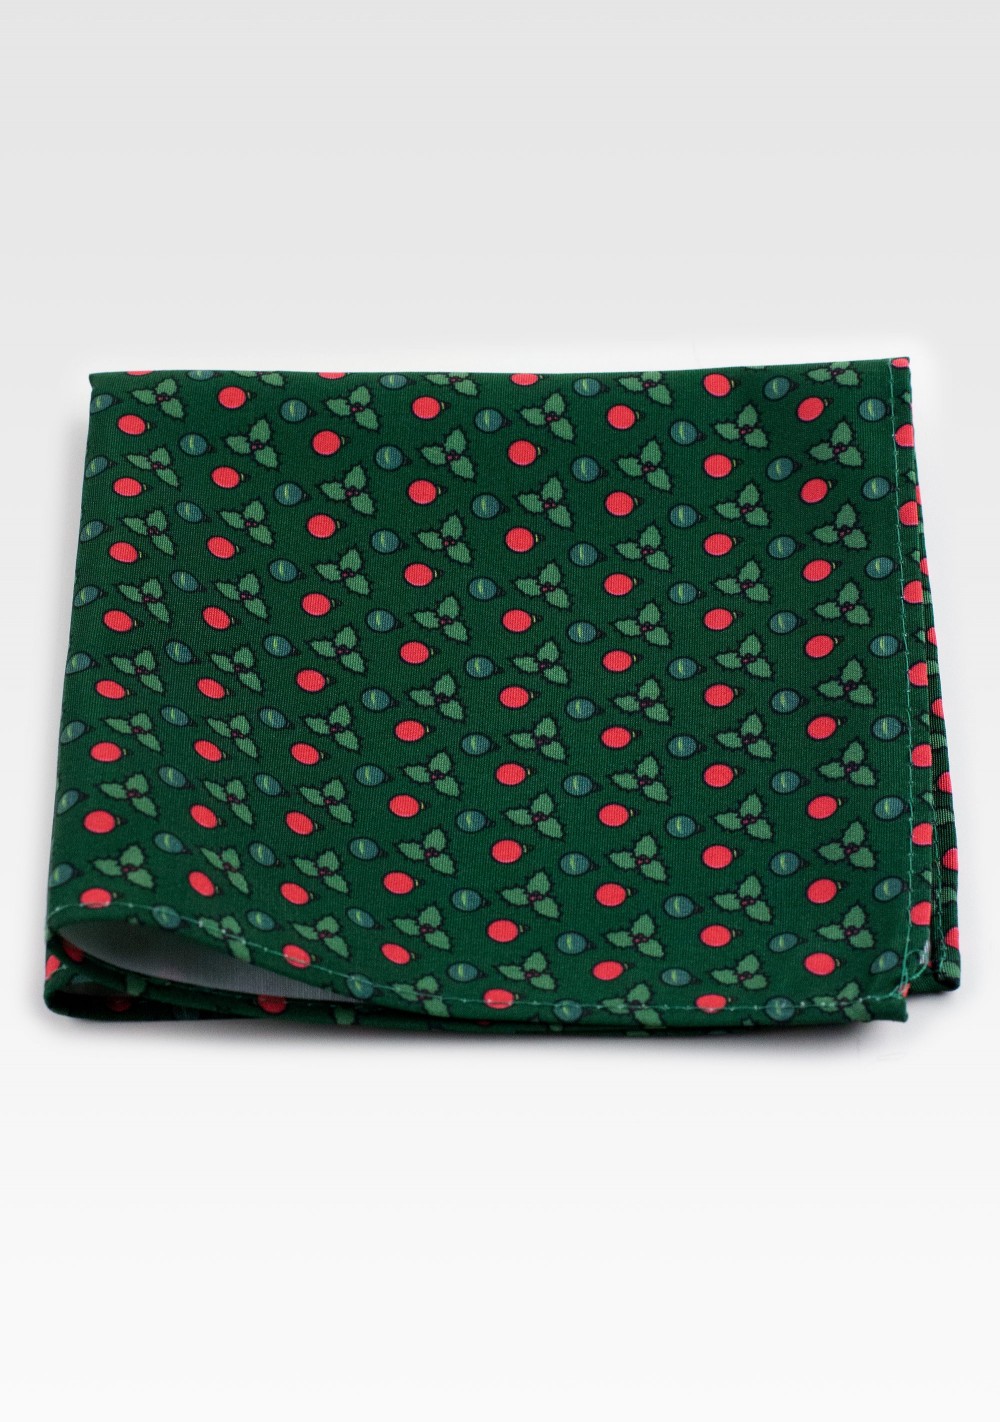 Dark Green Holiday Pocket Square with Holly Leaves